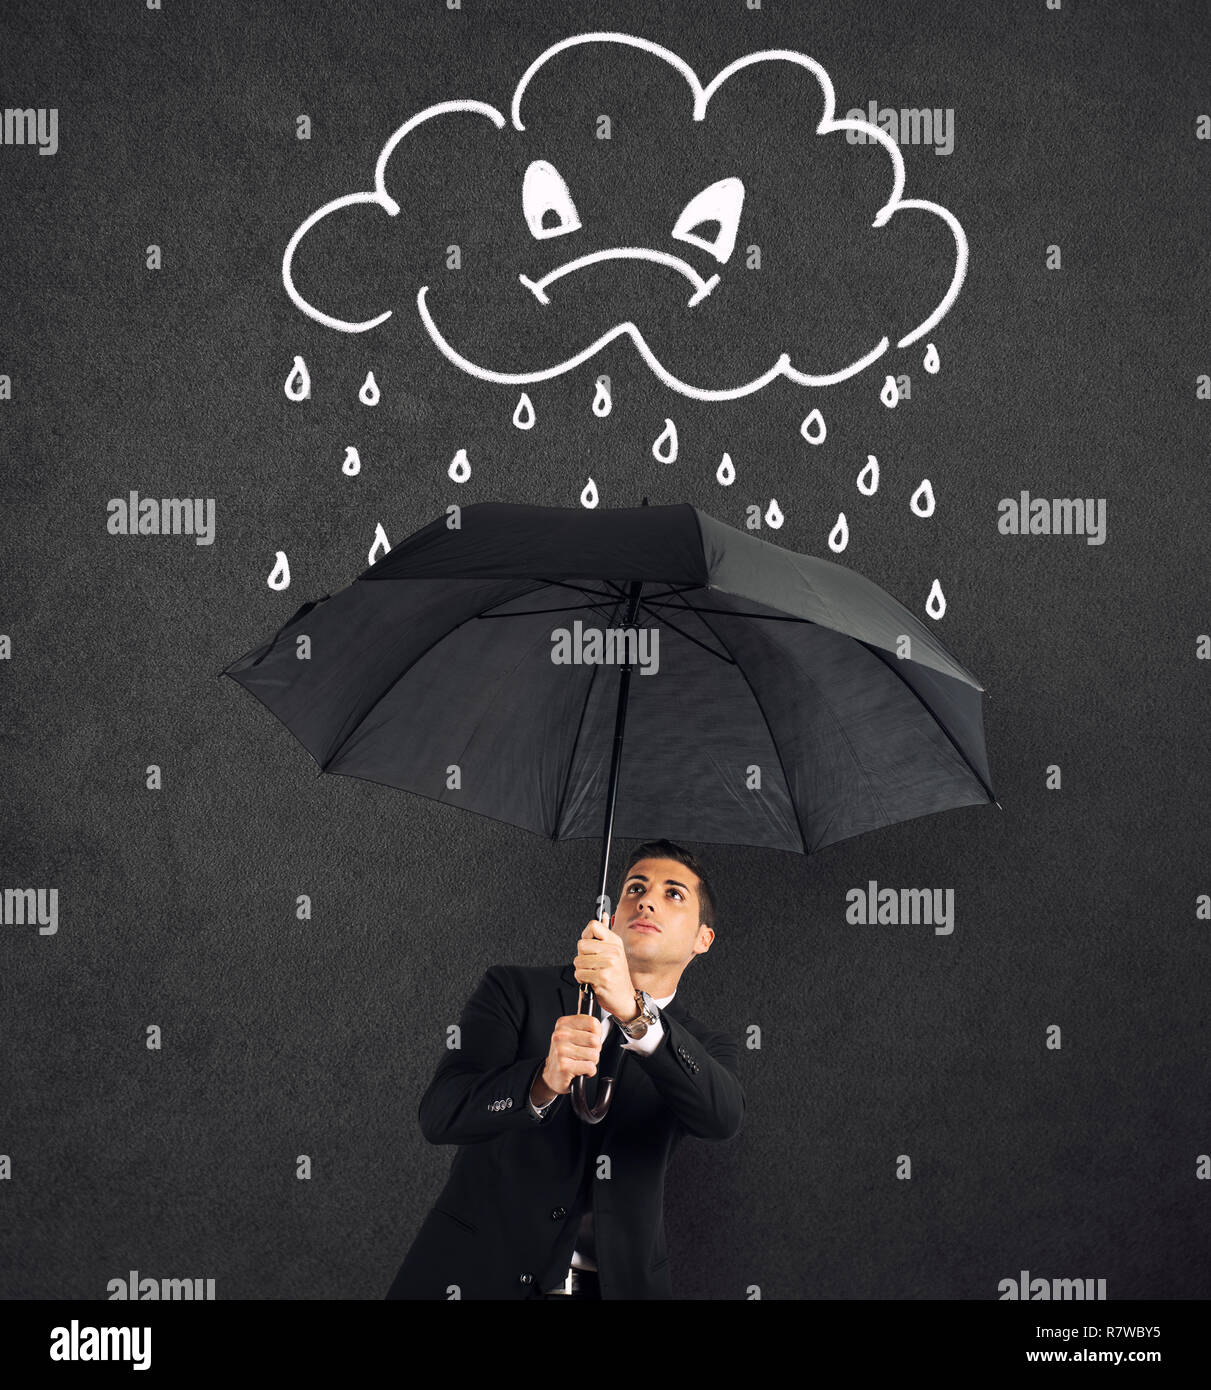 Businessman with umbrella and a angry cloud with rain. Concept of crisis and financial trouble Stock Photo